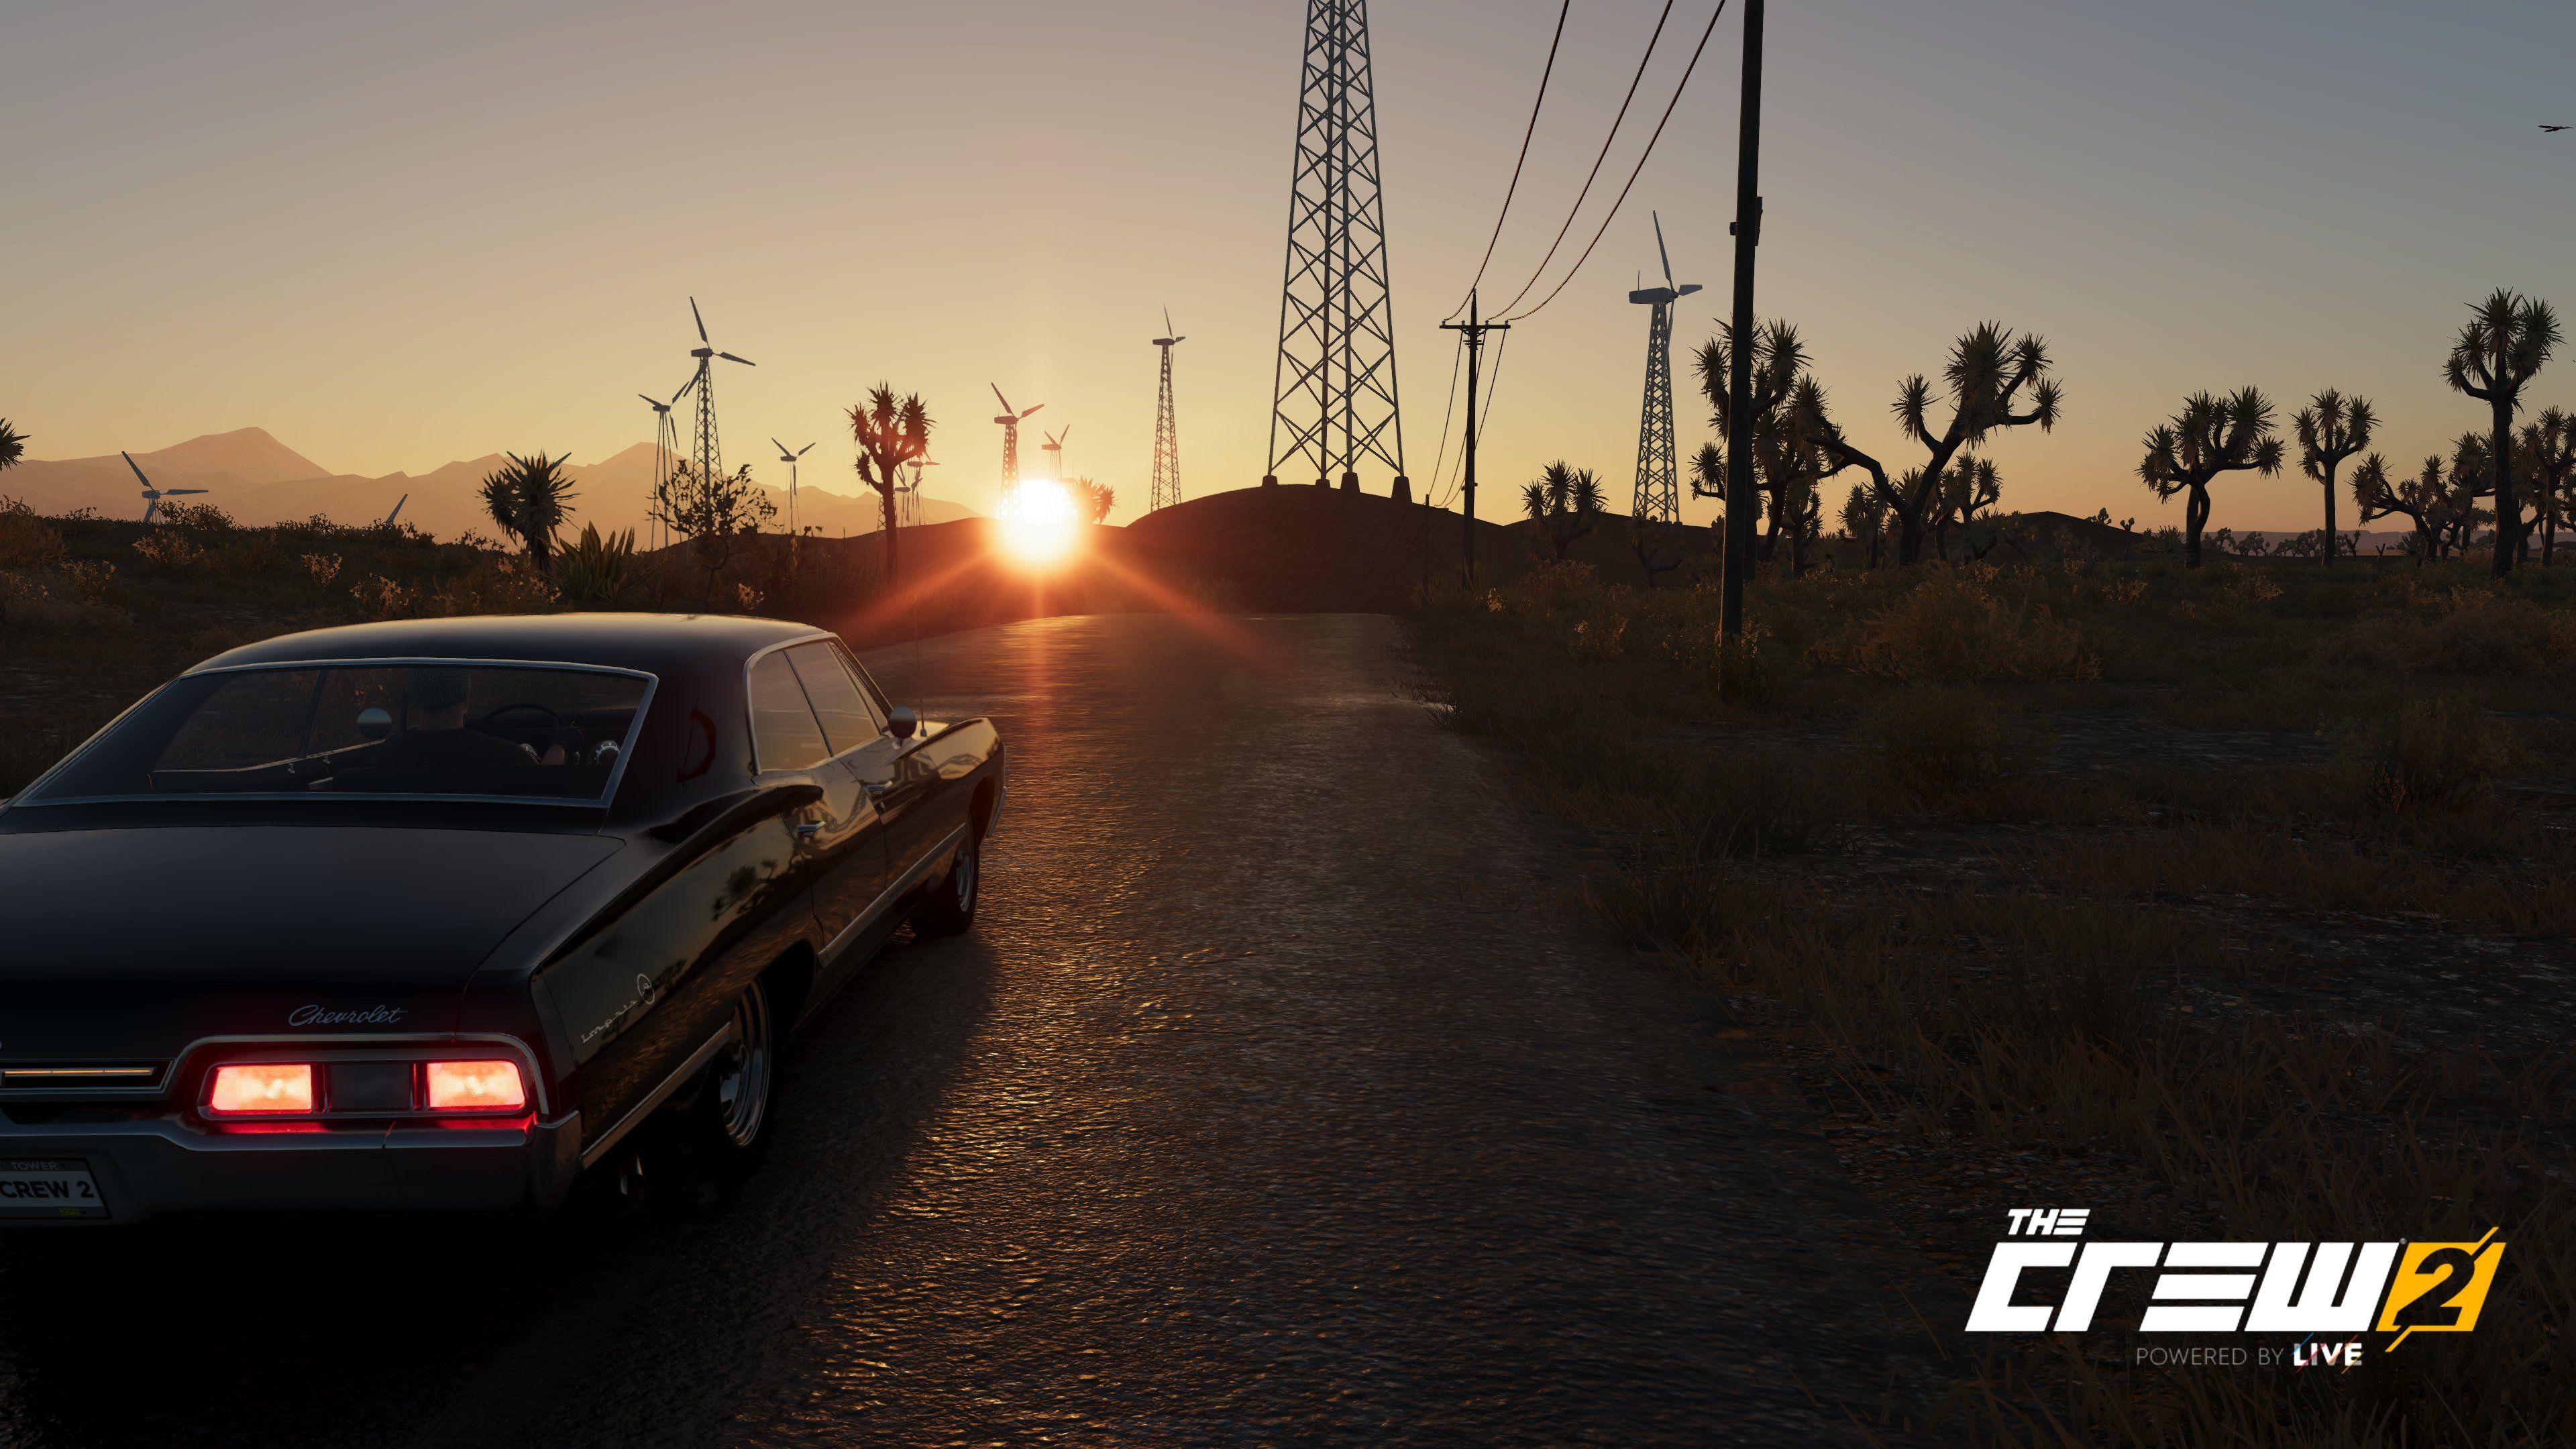 Download The Crew 2 wallpapers for mobile phone free The Crew 2 HD  pictures